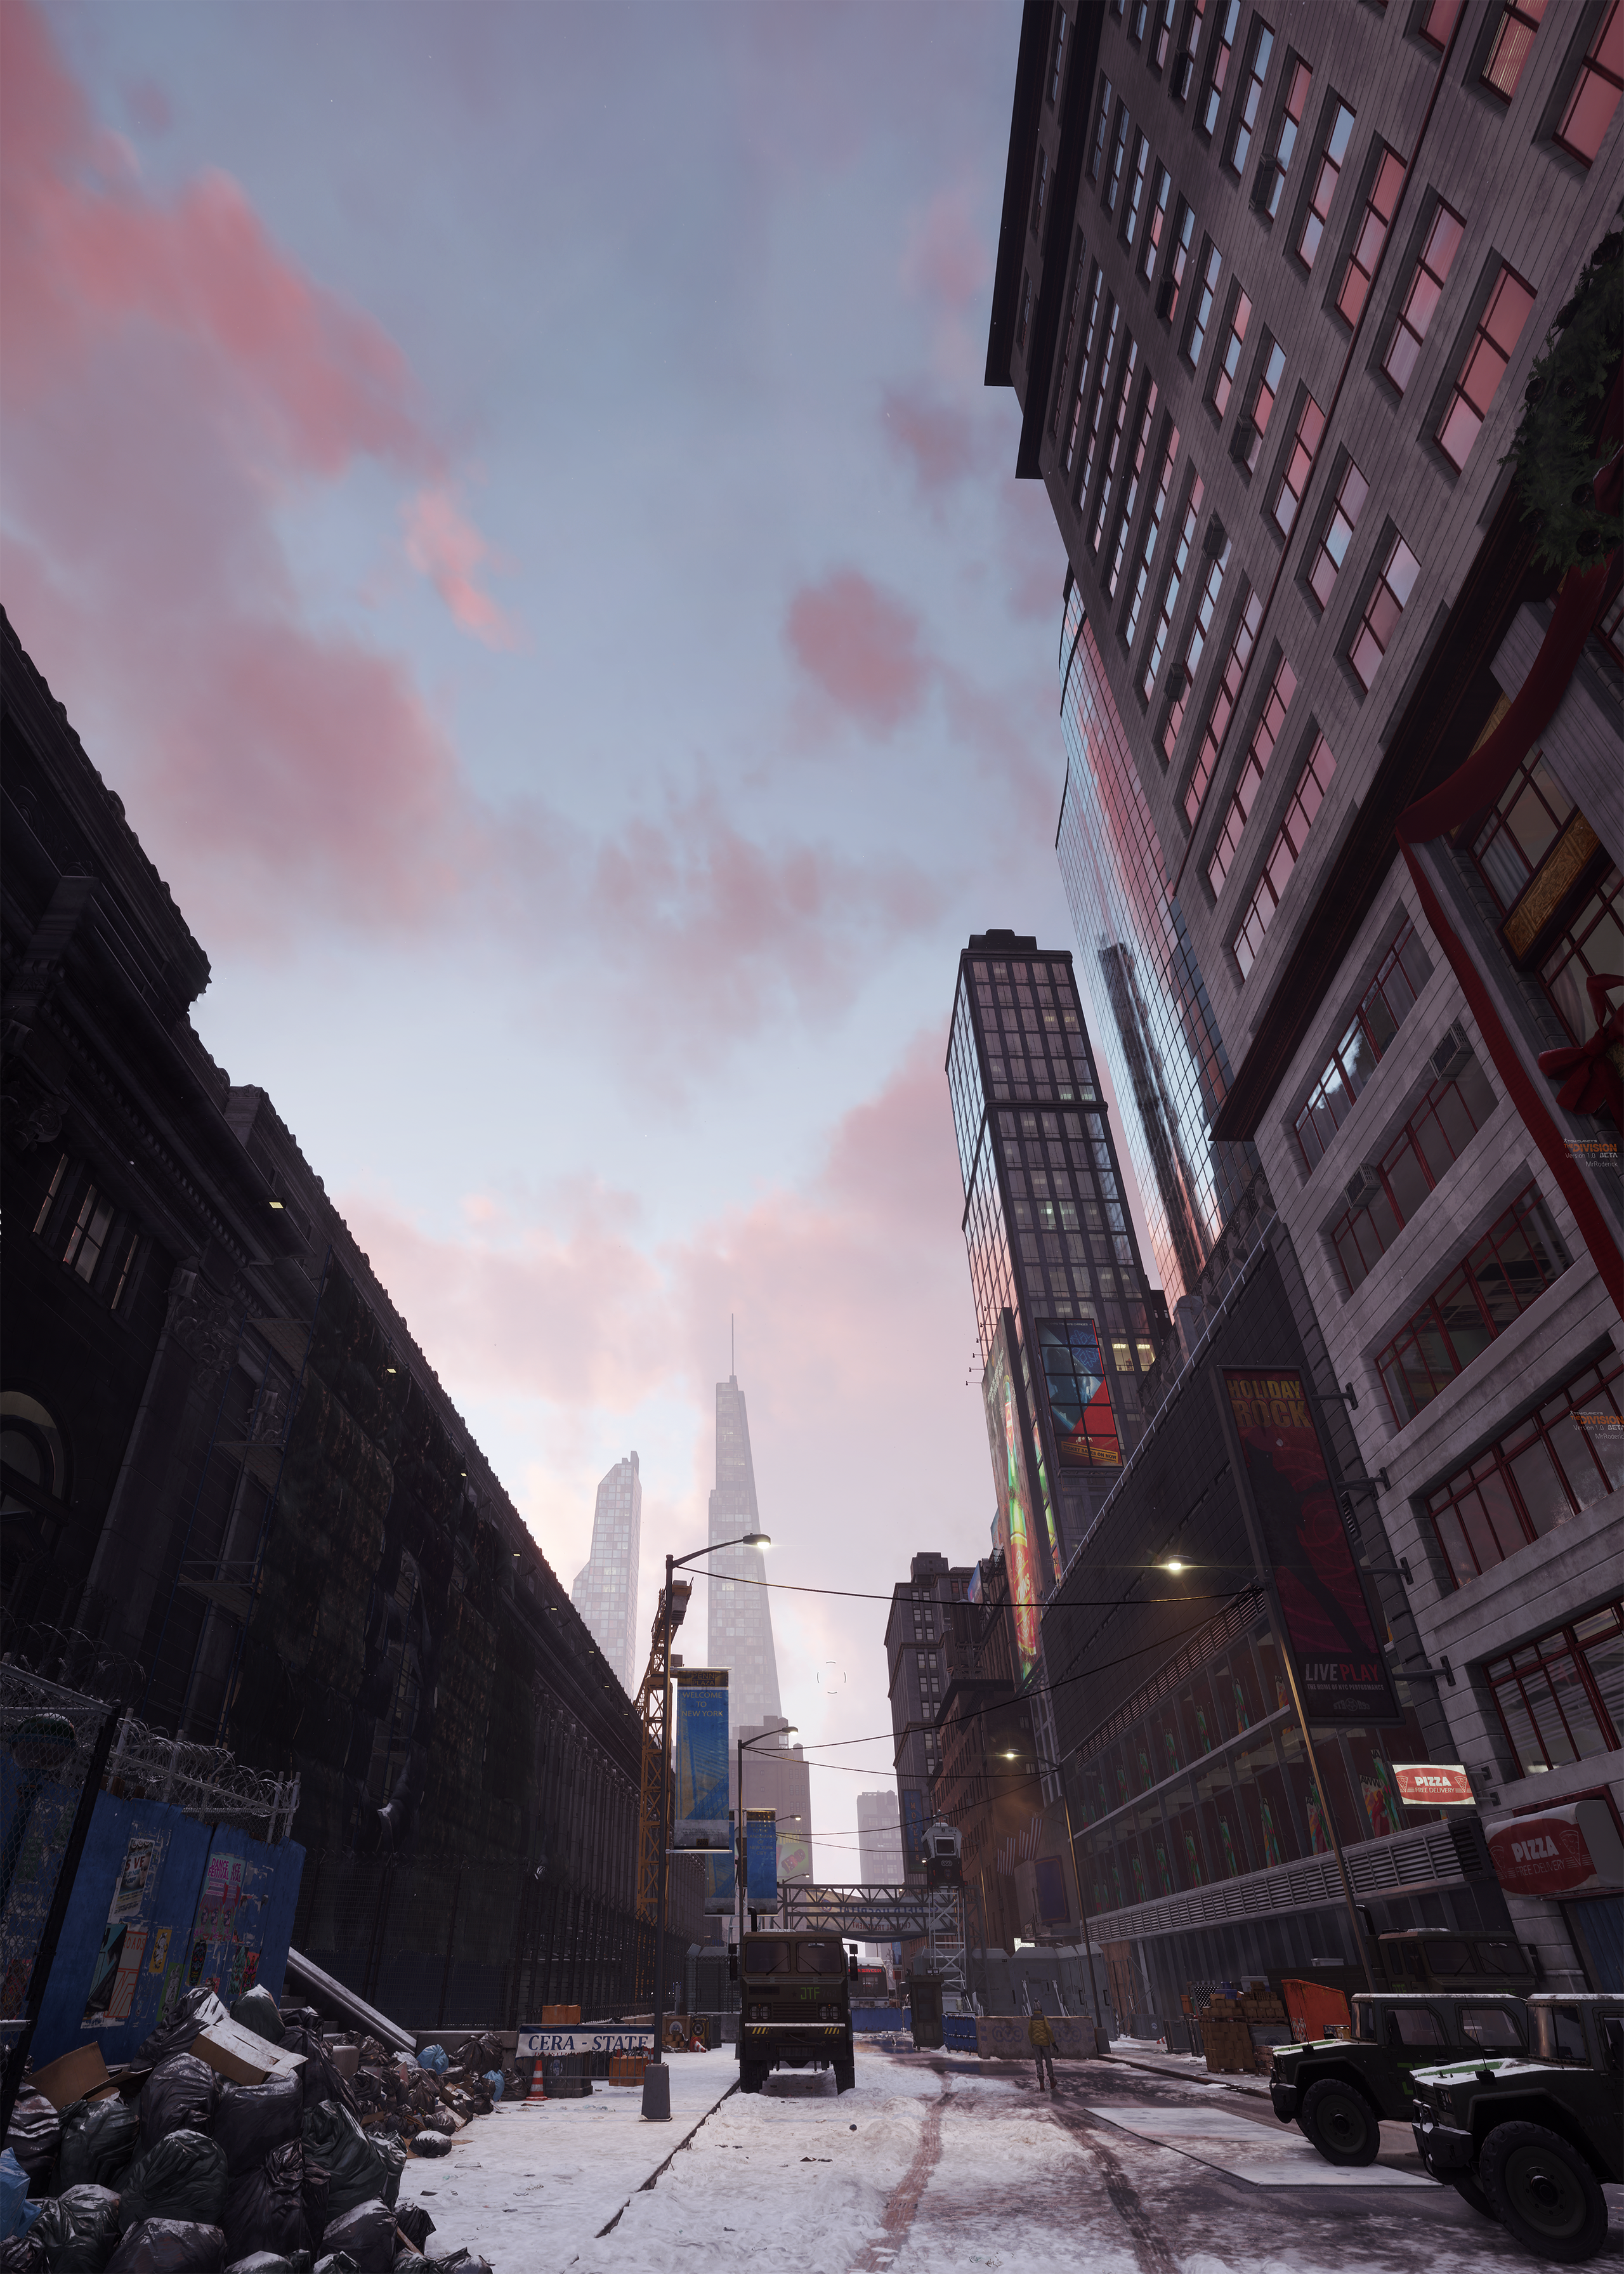 thedivision_pano_1_by_roderickartist-d9p